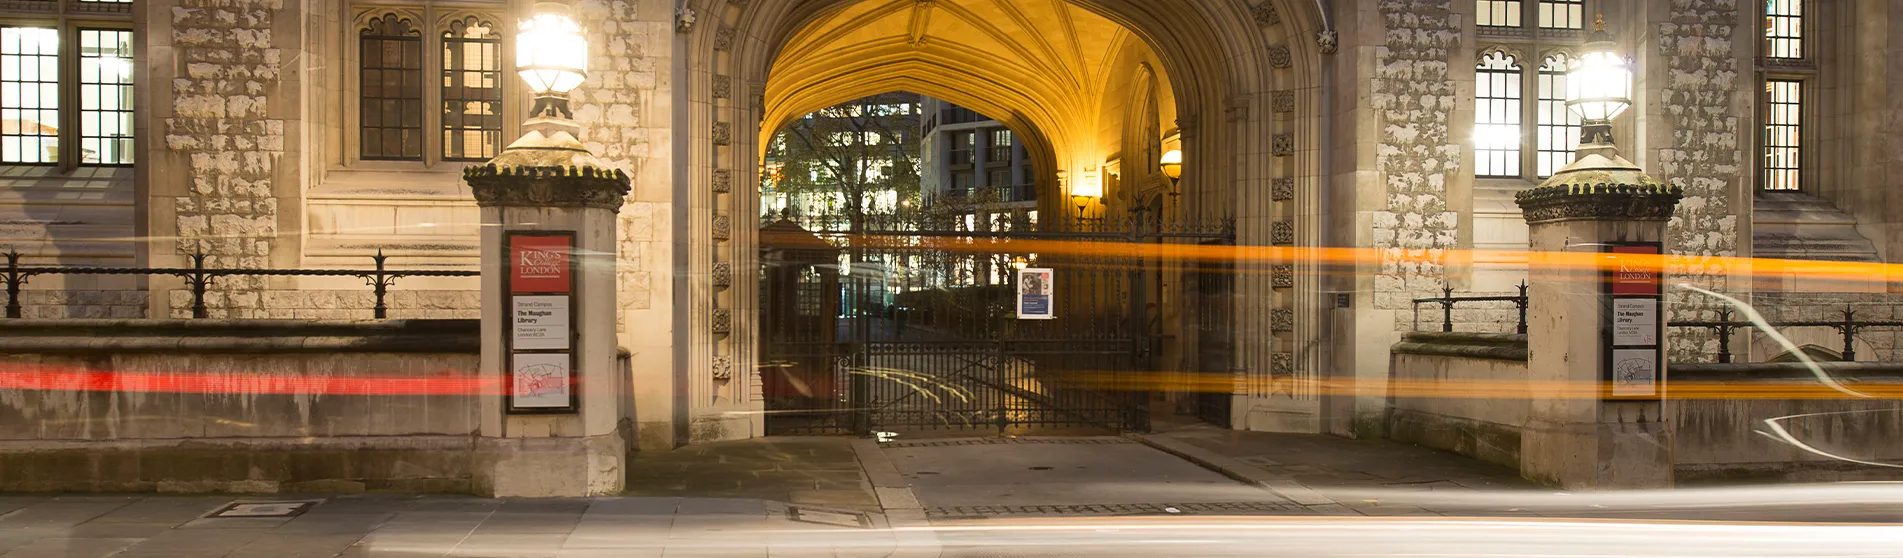 Two streetlights shine outside the front entrance to the Maughan Library at night